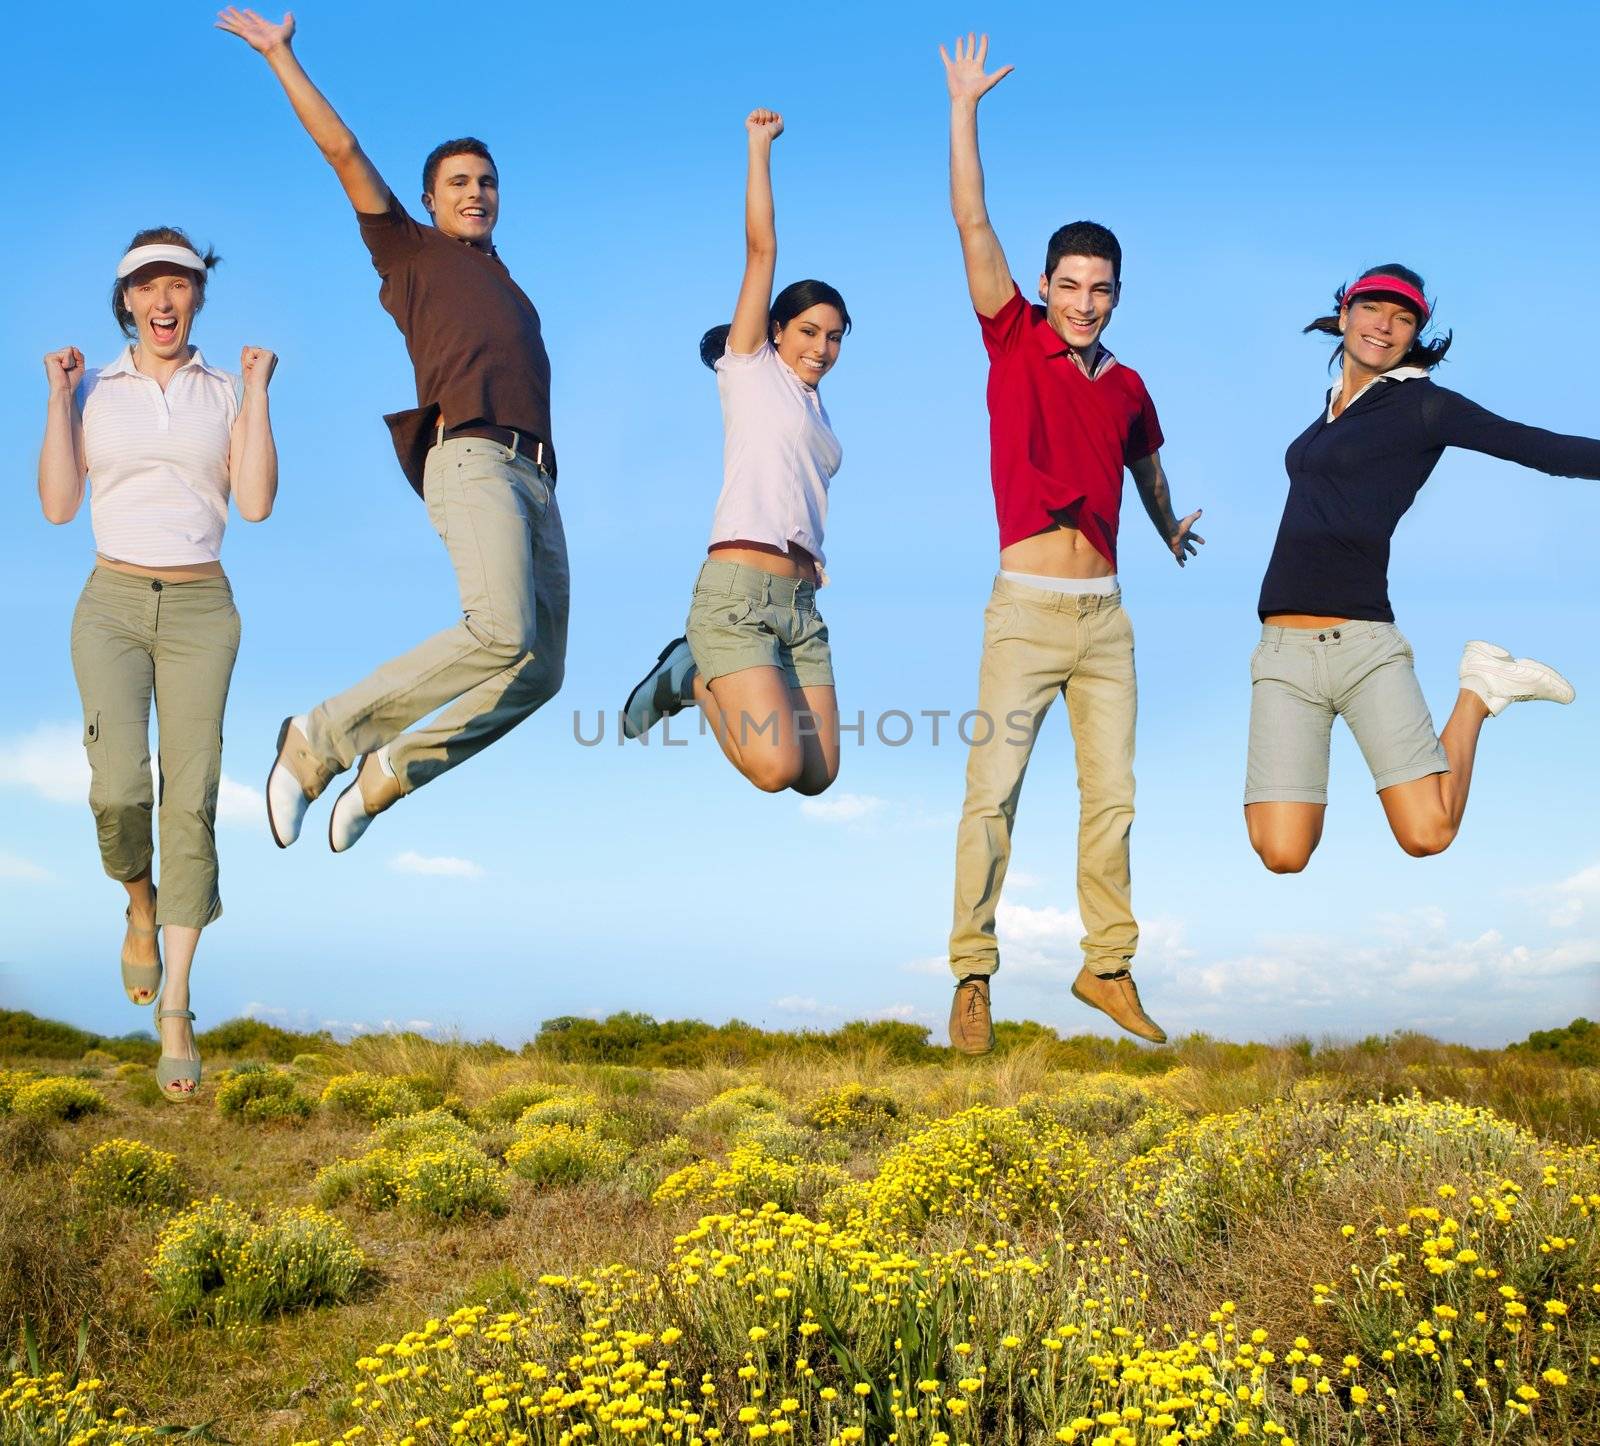 Jumping young people happy group in yellow flowers field